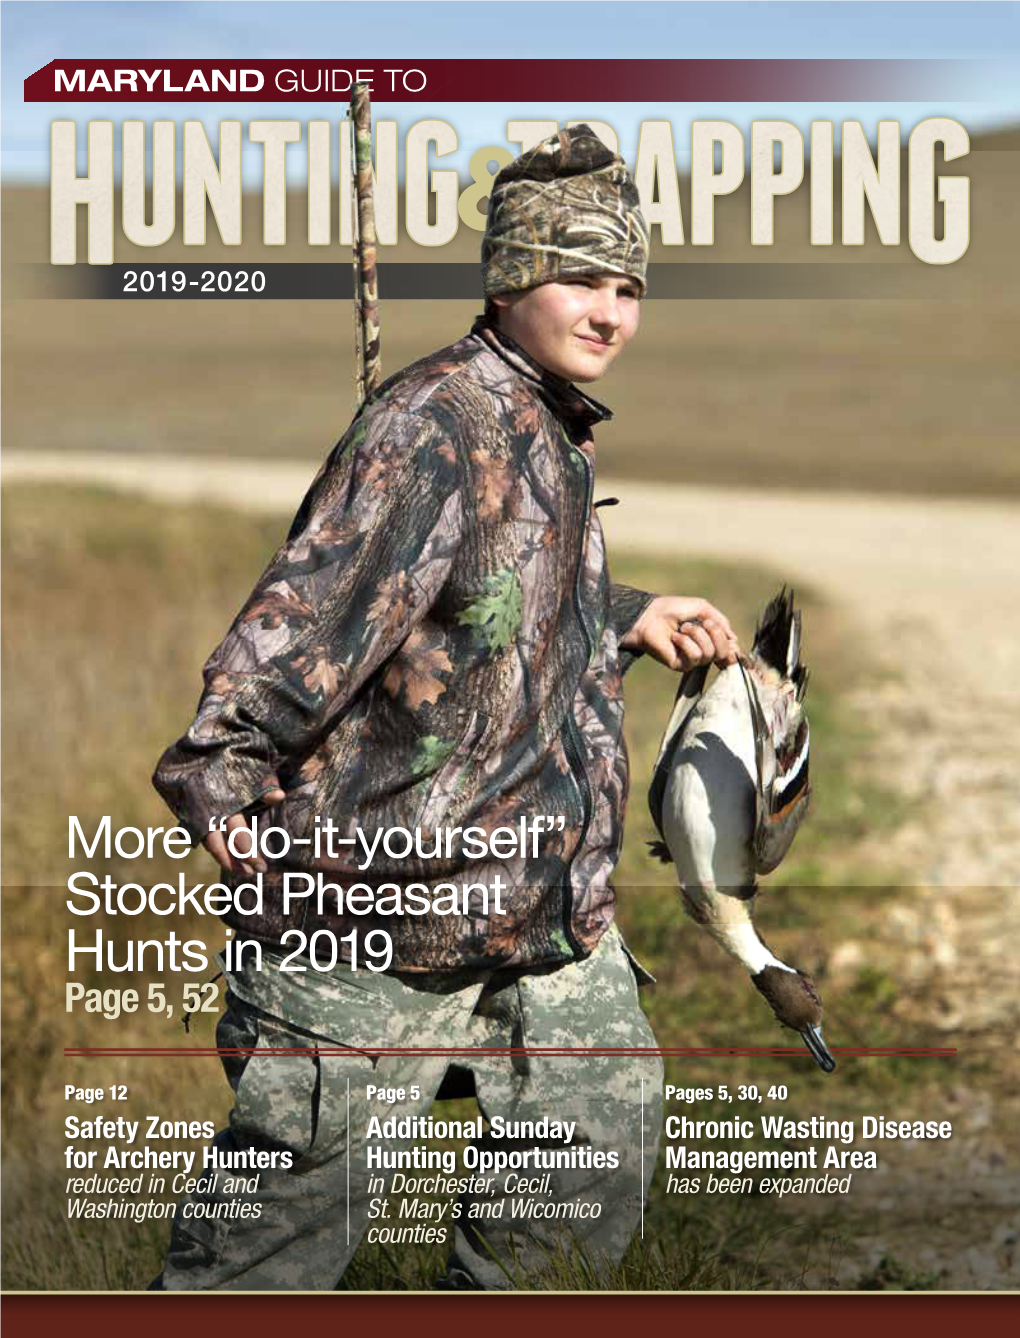 Stocked Pheasant Hunts in 2019 Page 5, 52